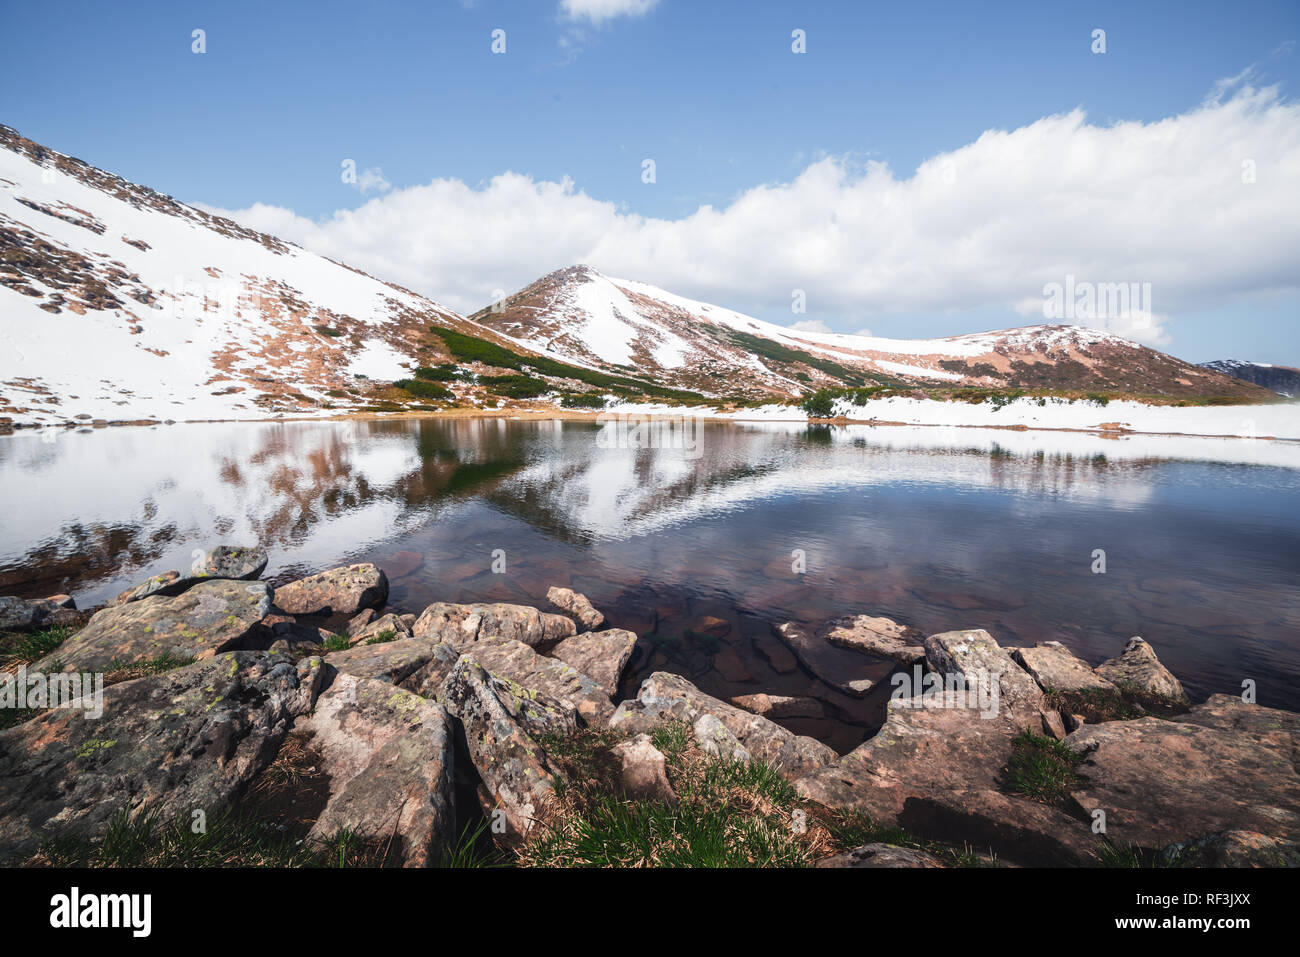 Spring mountain lake with clear water and red stones. Picturesque winter landscape with snowy hills under a blue sky Stock Photo